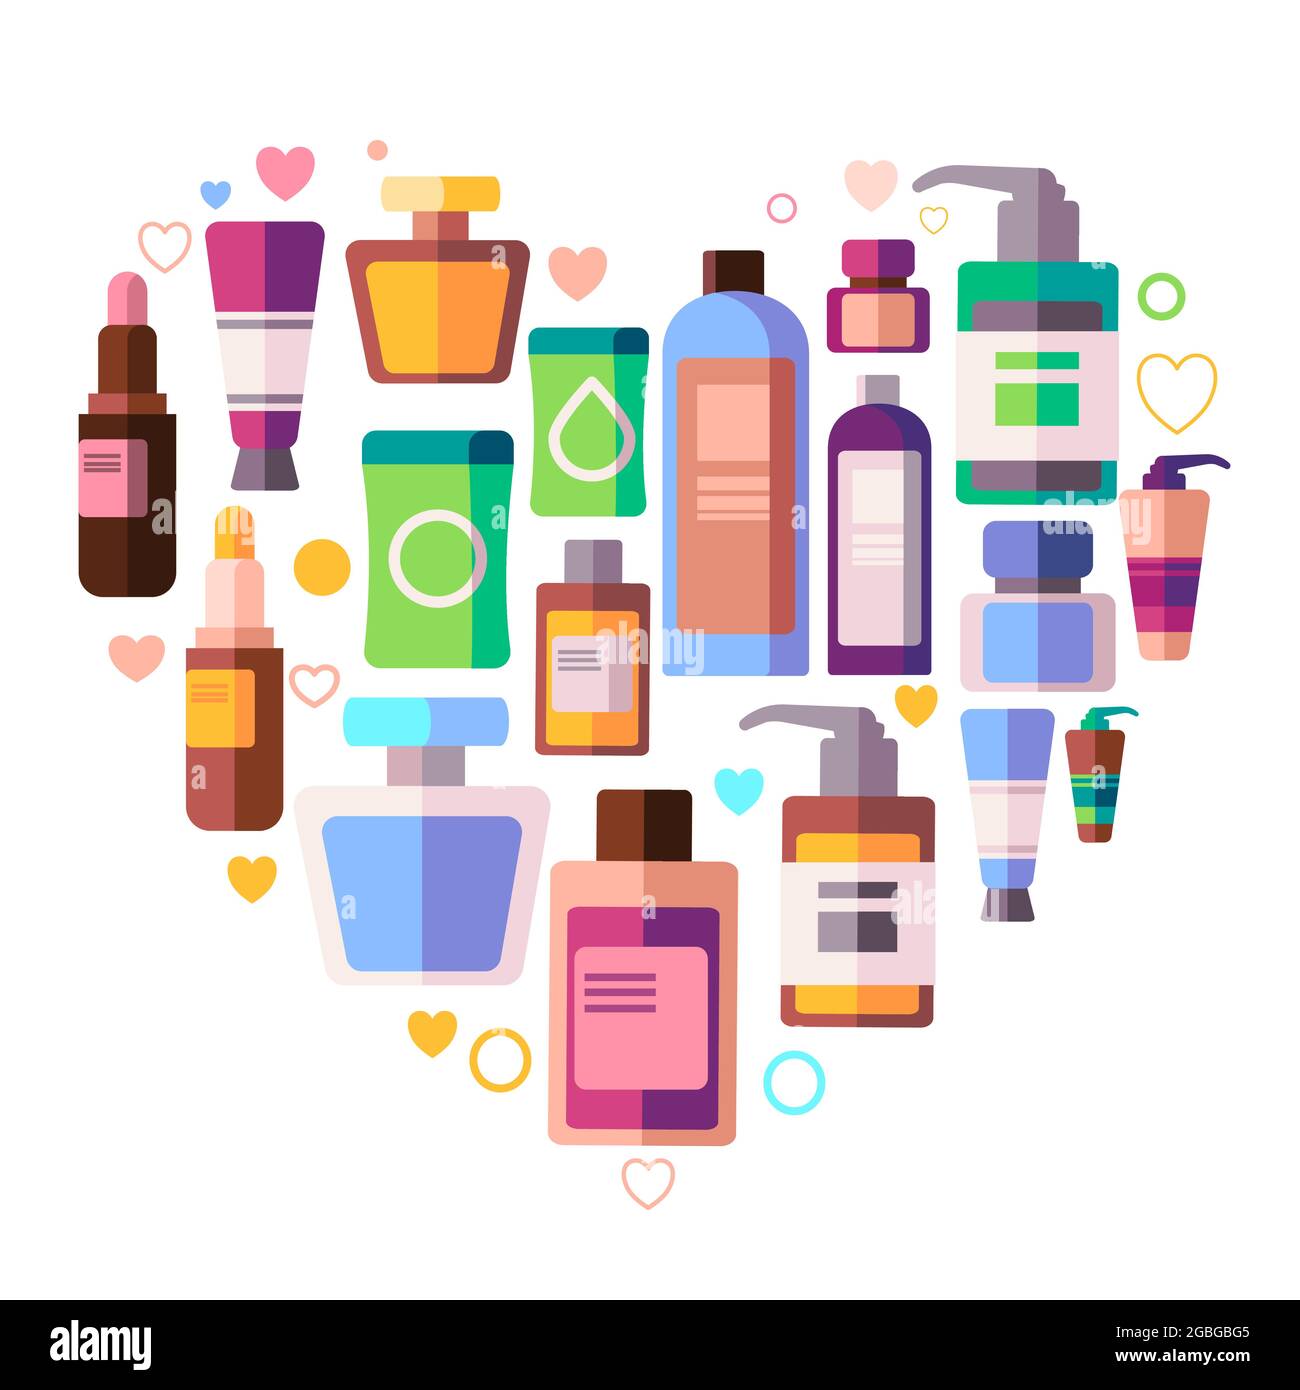 beauty care product likes soap shampoo, conditioner, lipstick, moisturizer cleanser and perfume in a various bottle will makes you more beautiful Stock Vector